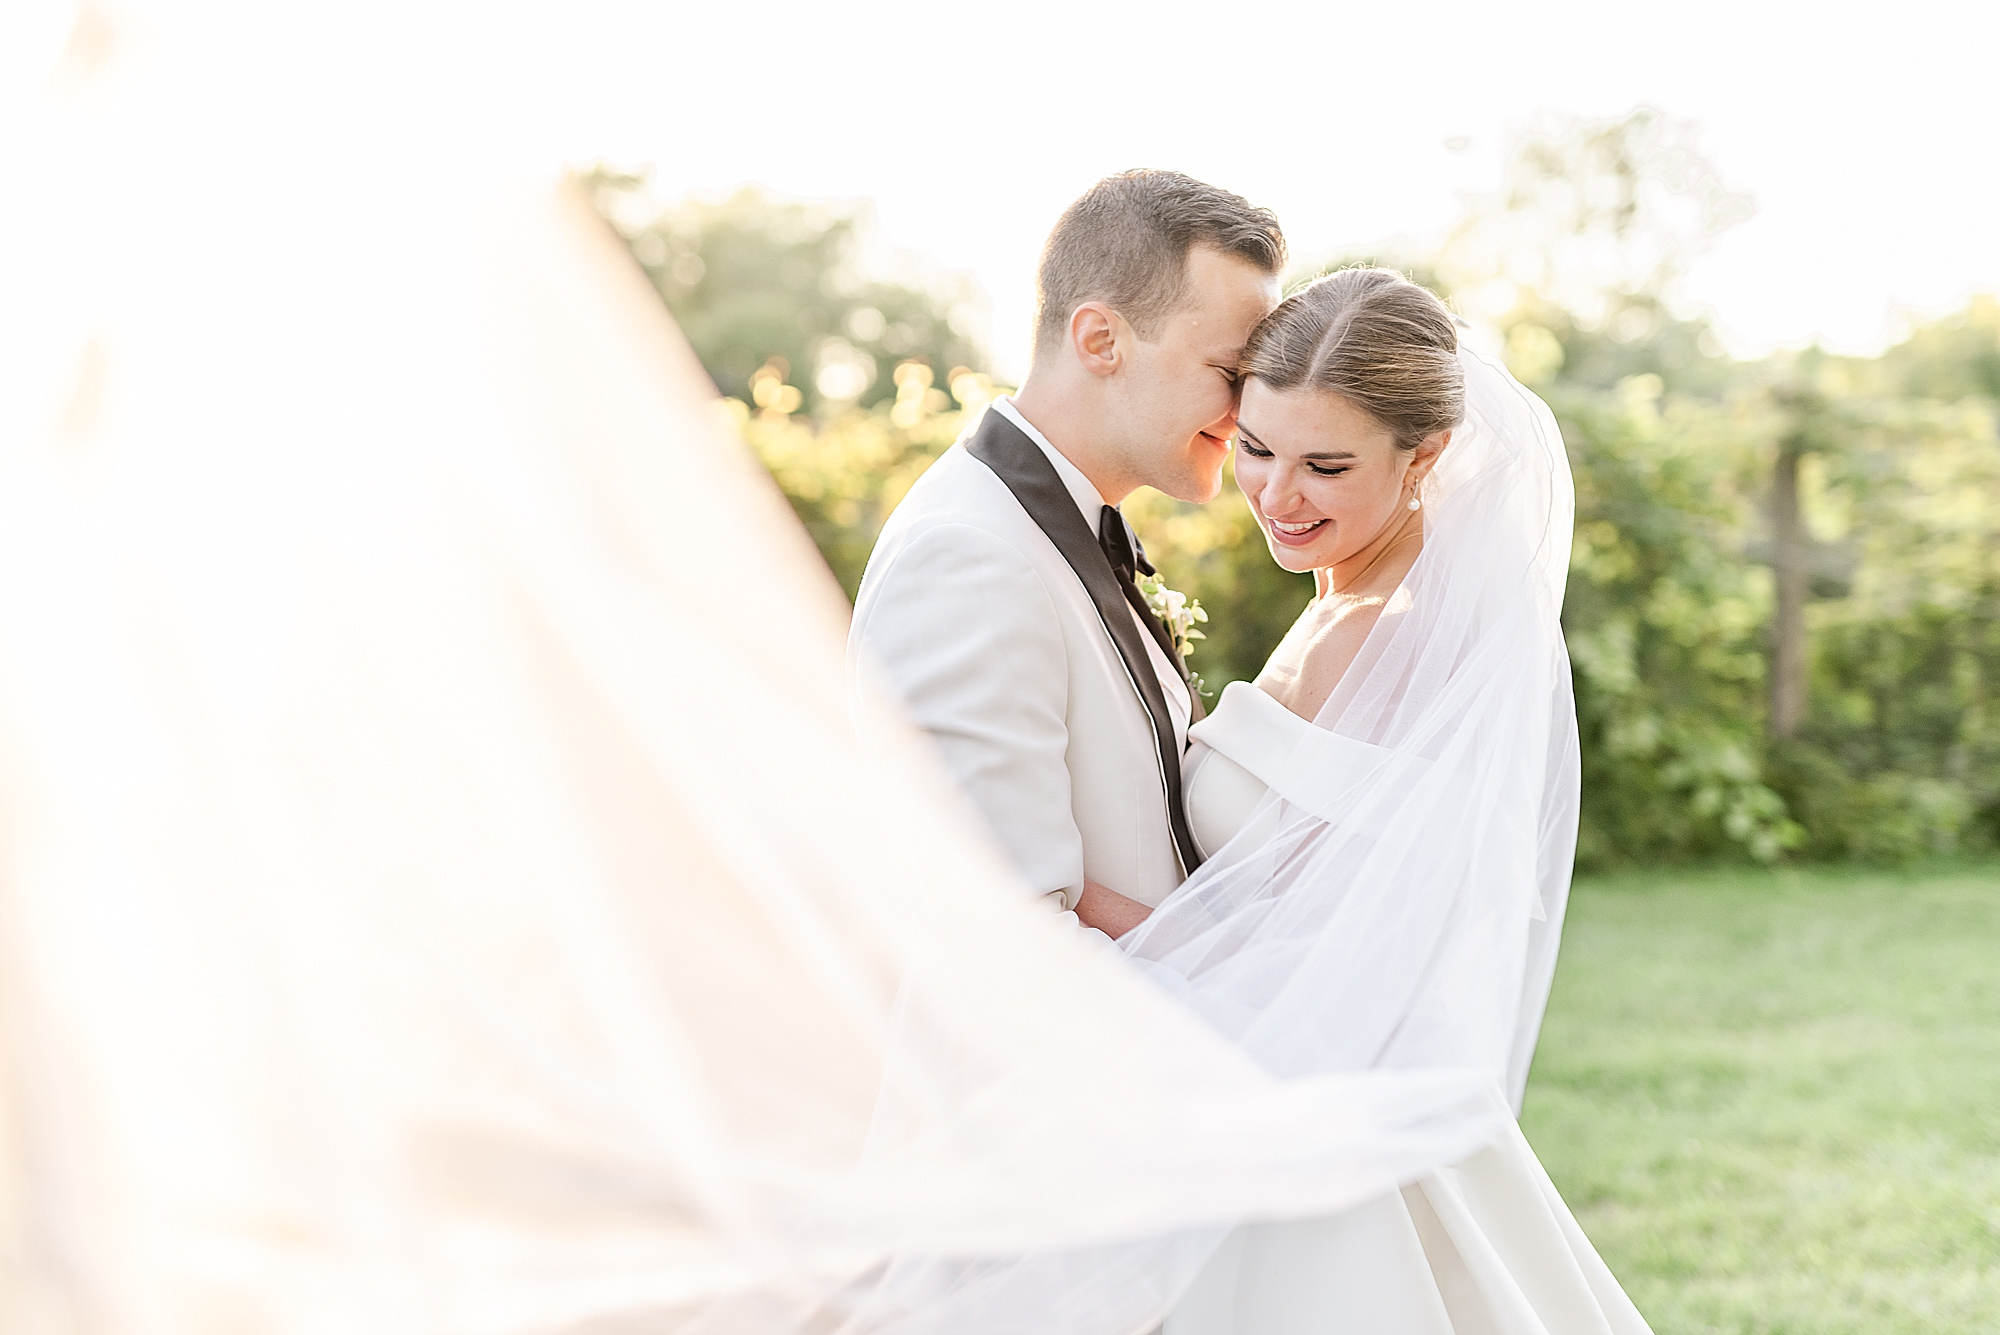 bride and groom smile while veil twists in the wind